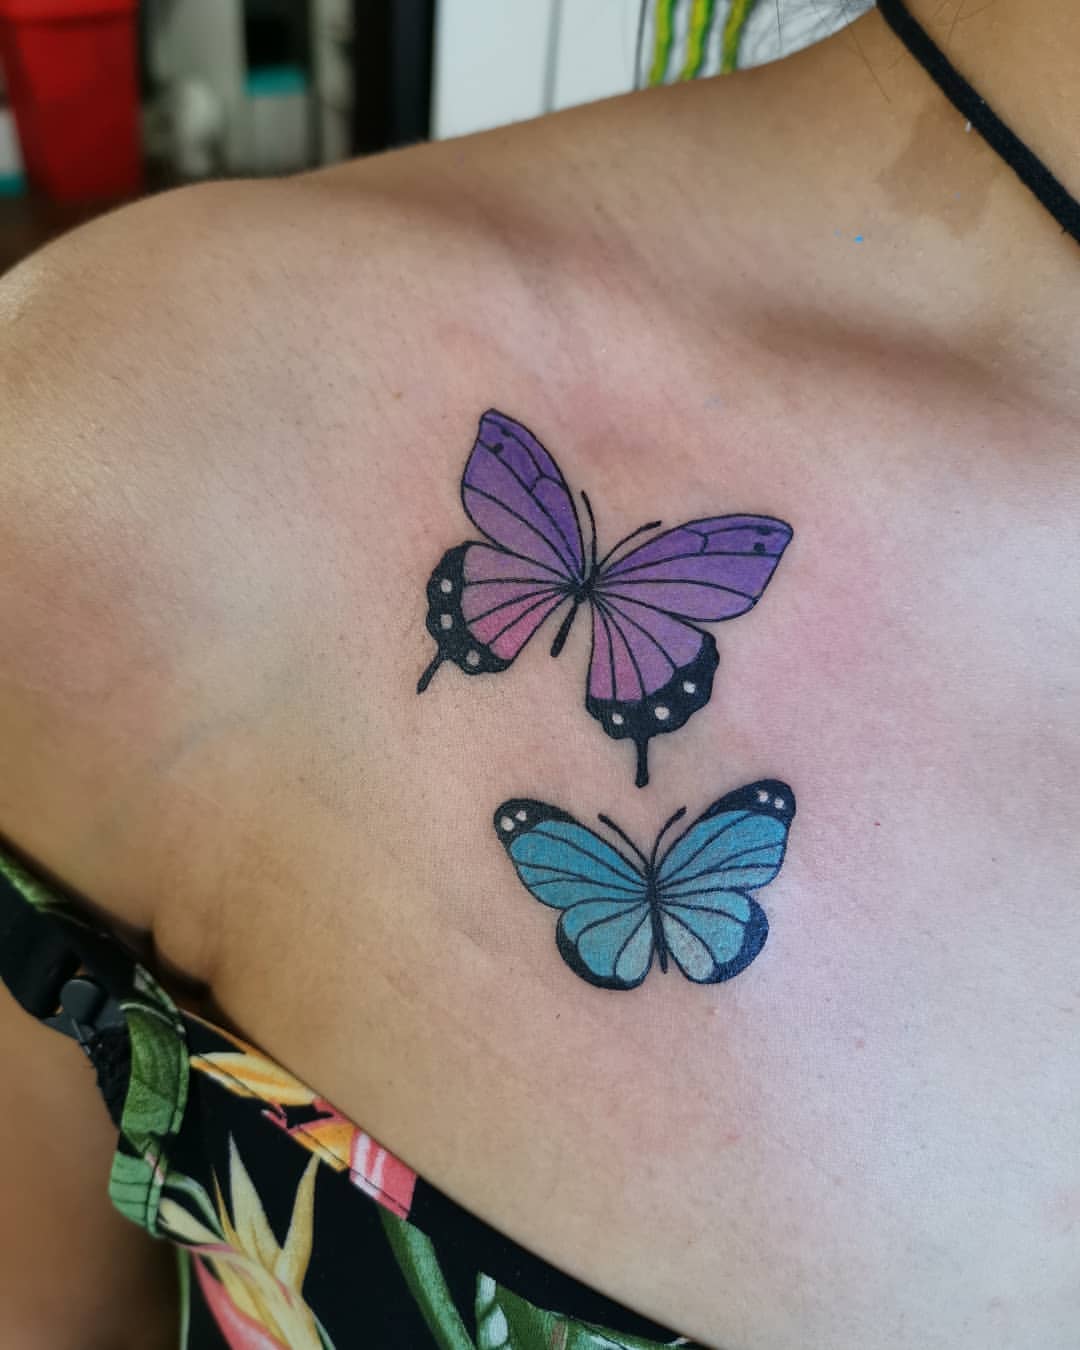 Butterfly Tattoo Design Betydelse Tattoo Clavicle Pain Tattoo Engine Women